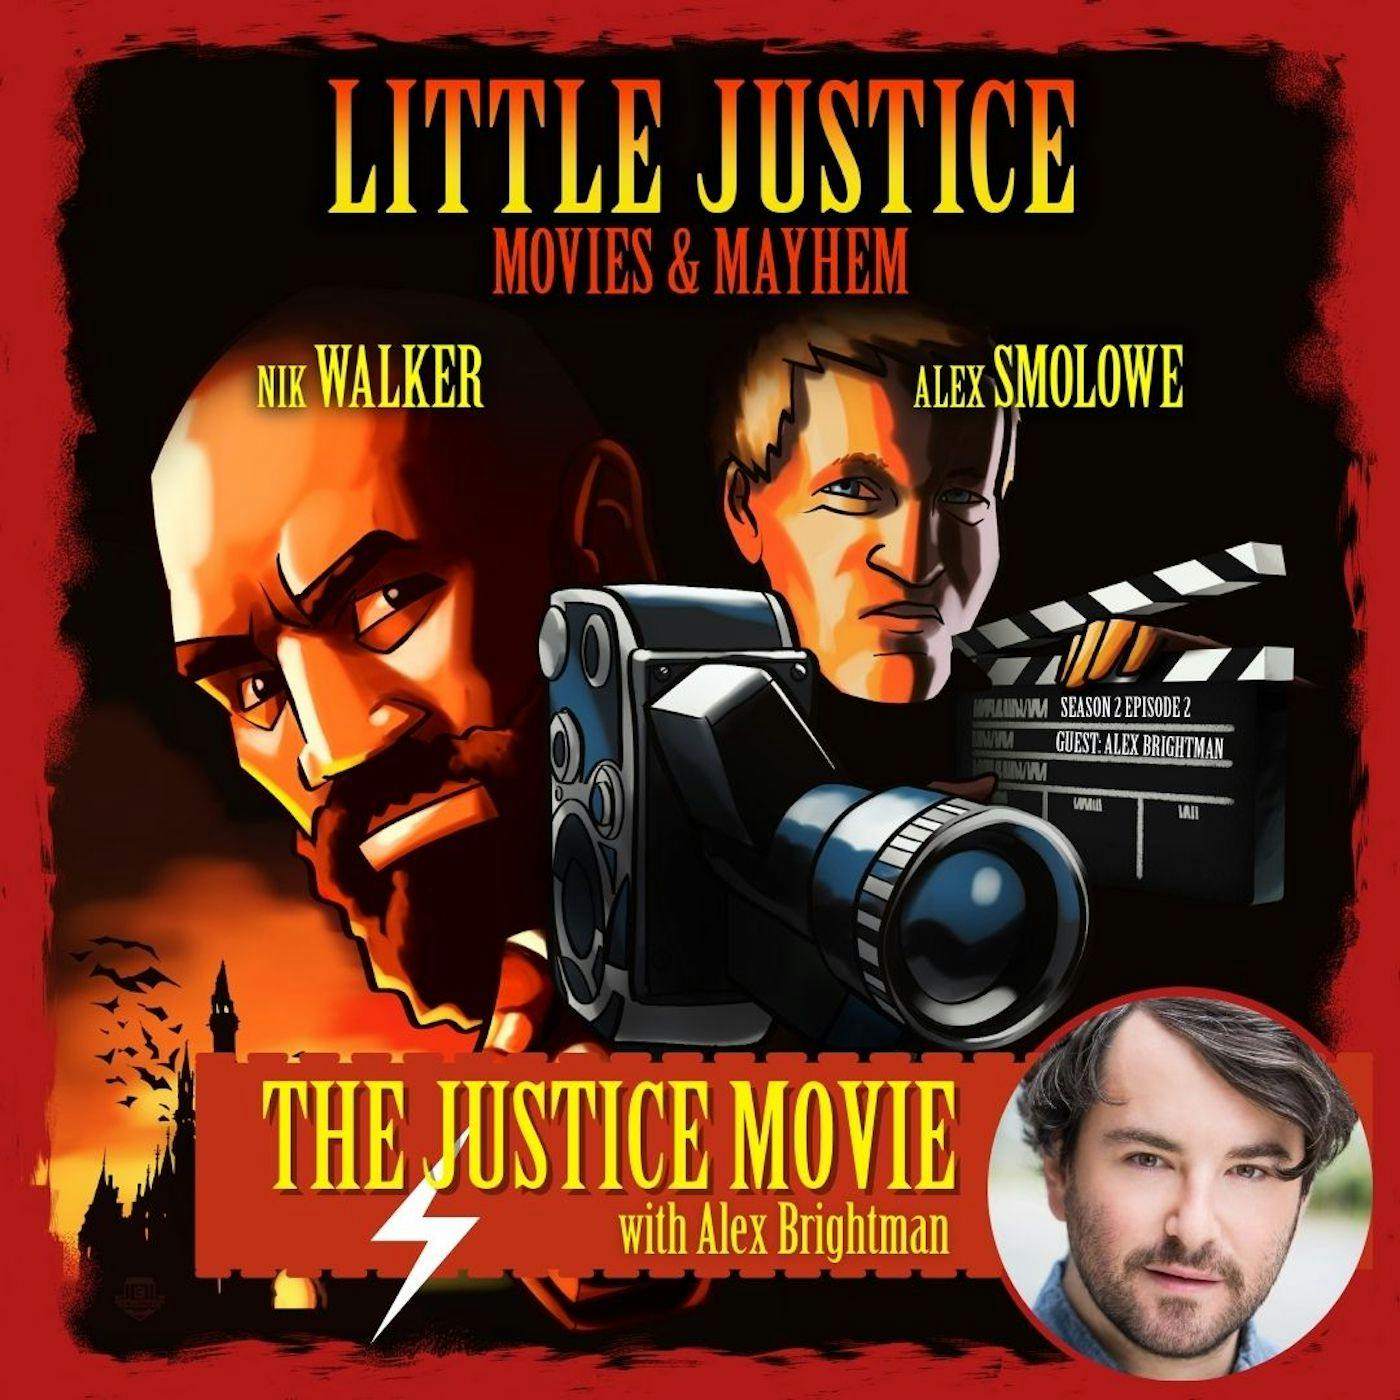 The Justice Movie with Alex Brightman from Beetlejuice & School of Rock on Broadway